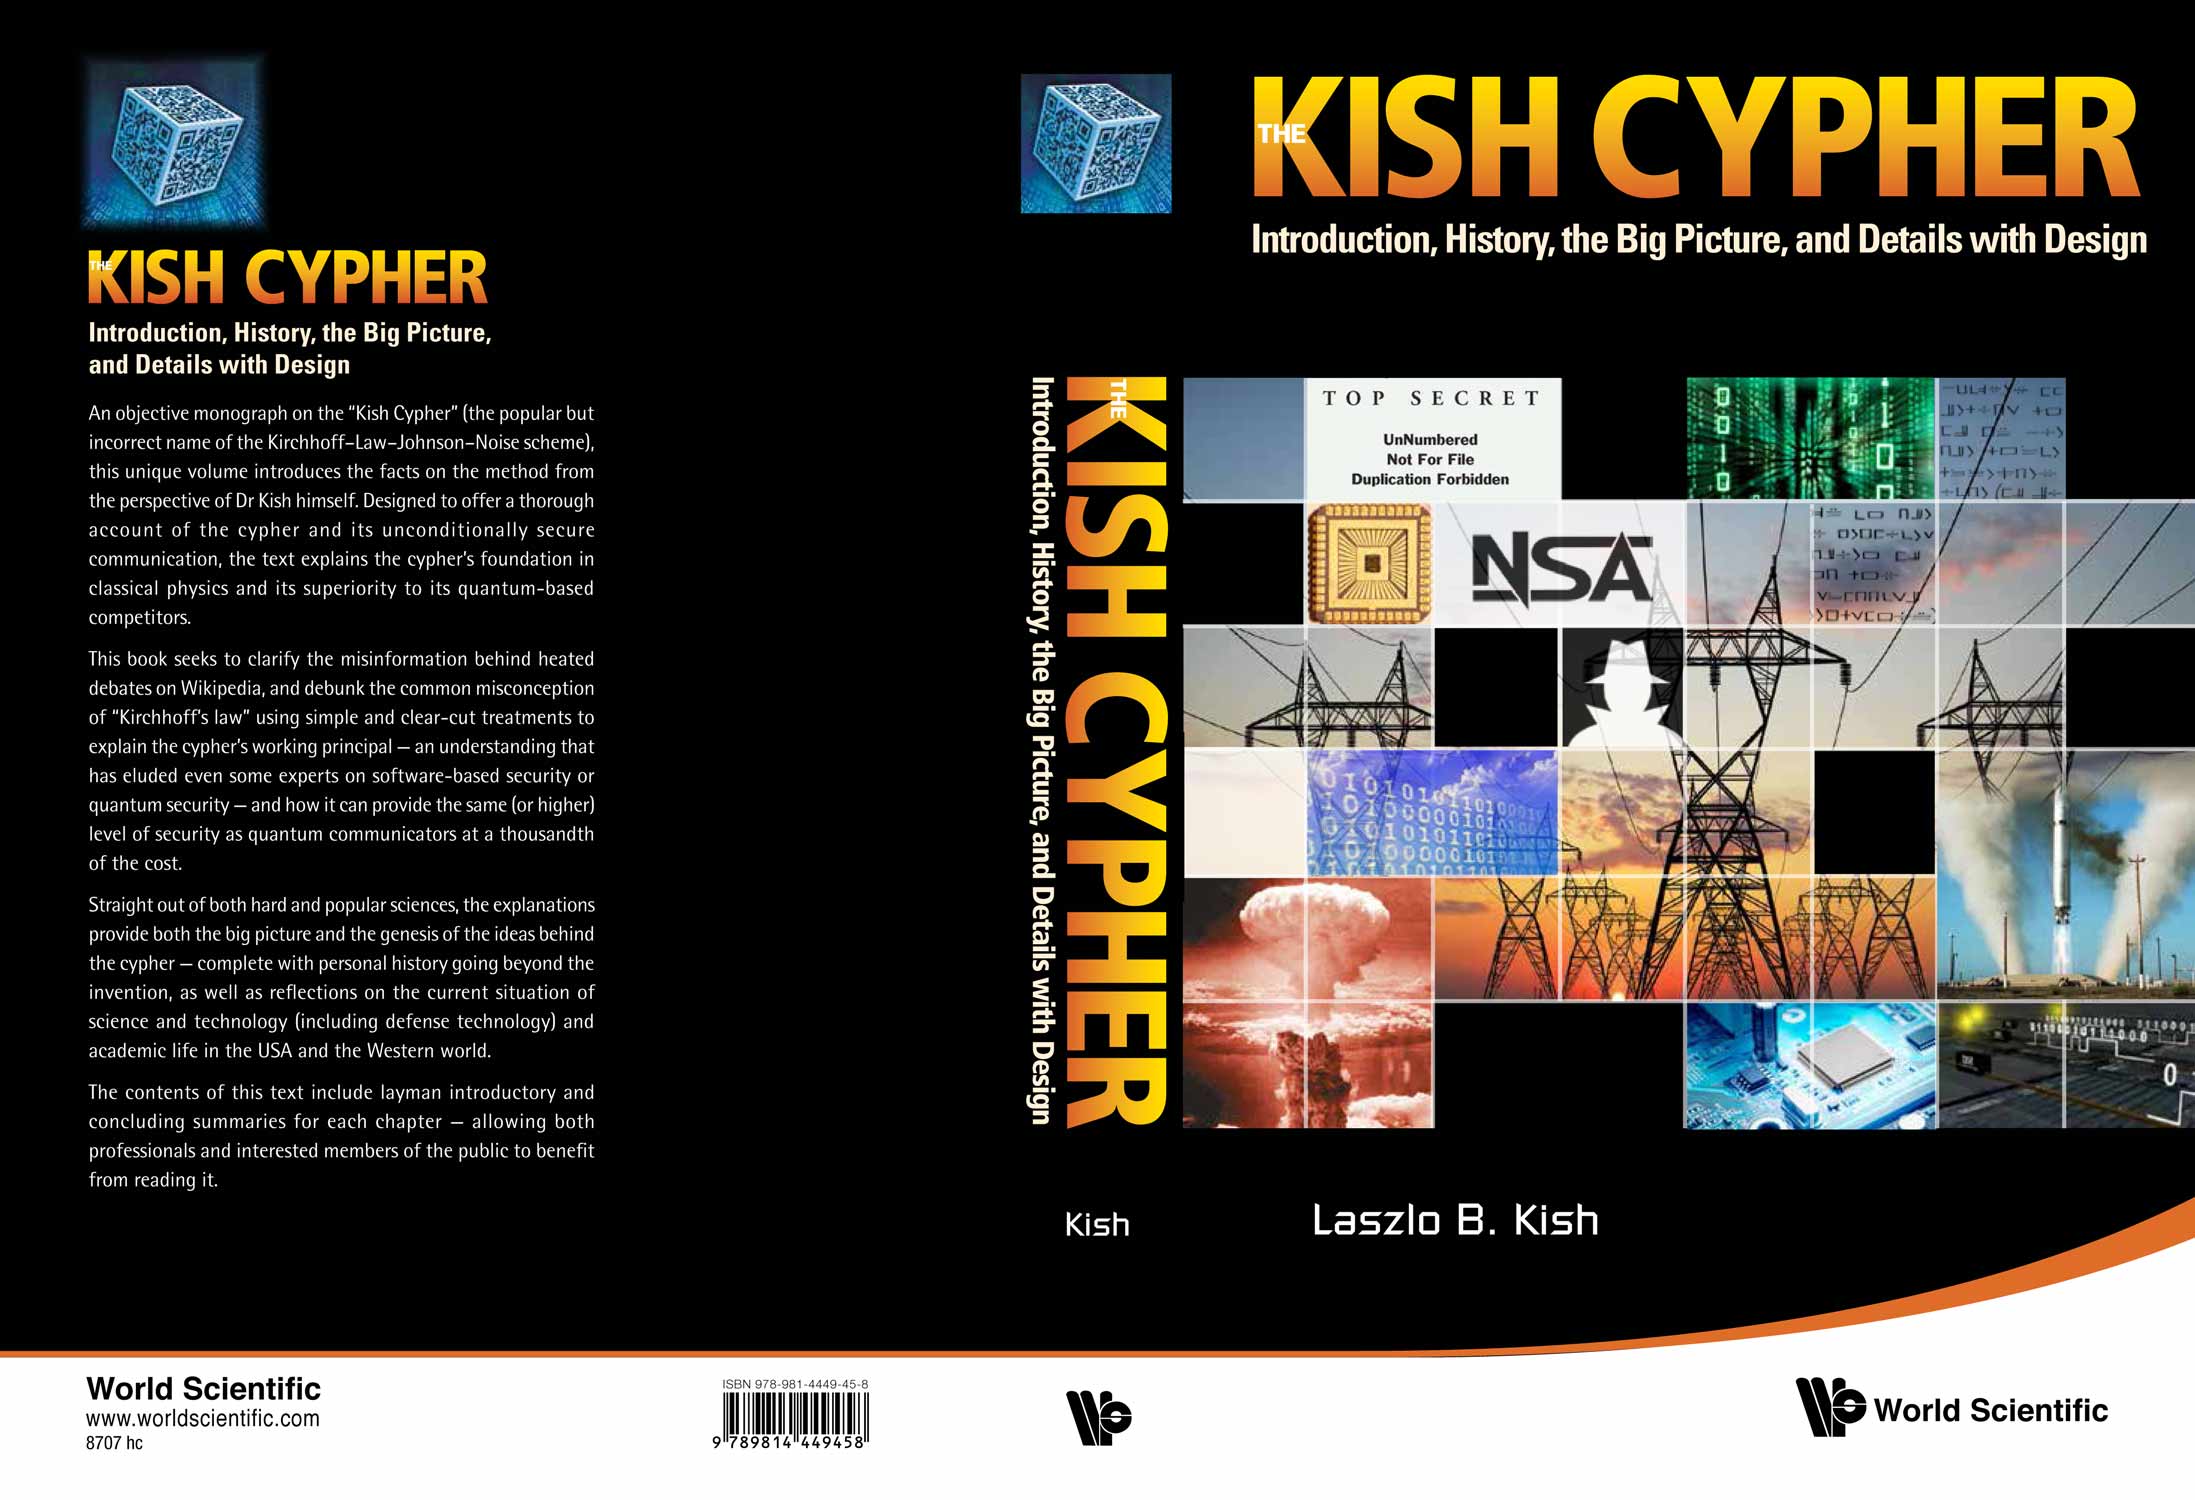 The KLN book cover and information